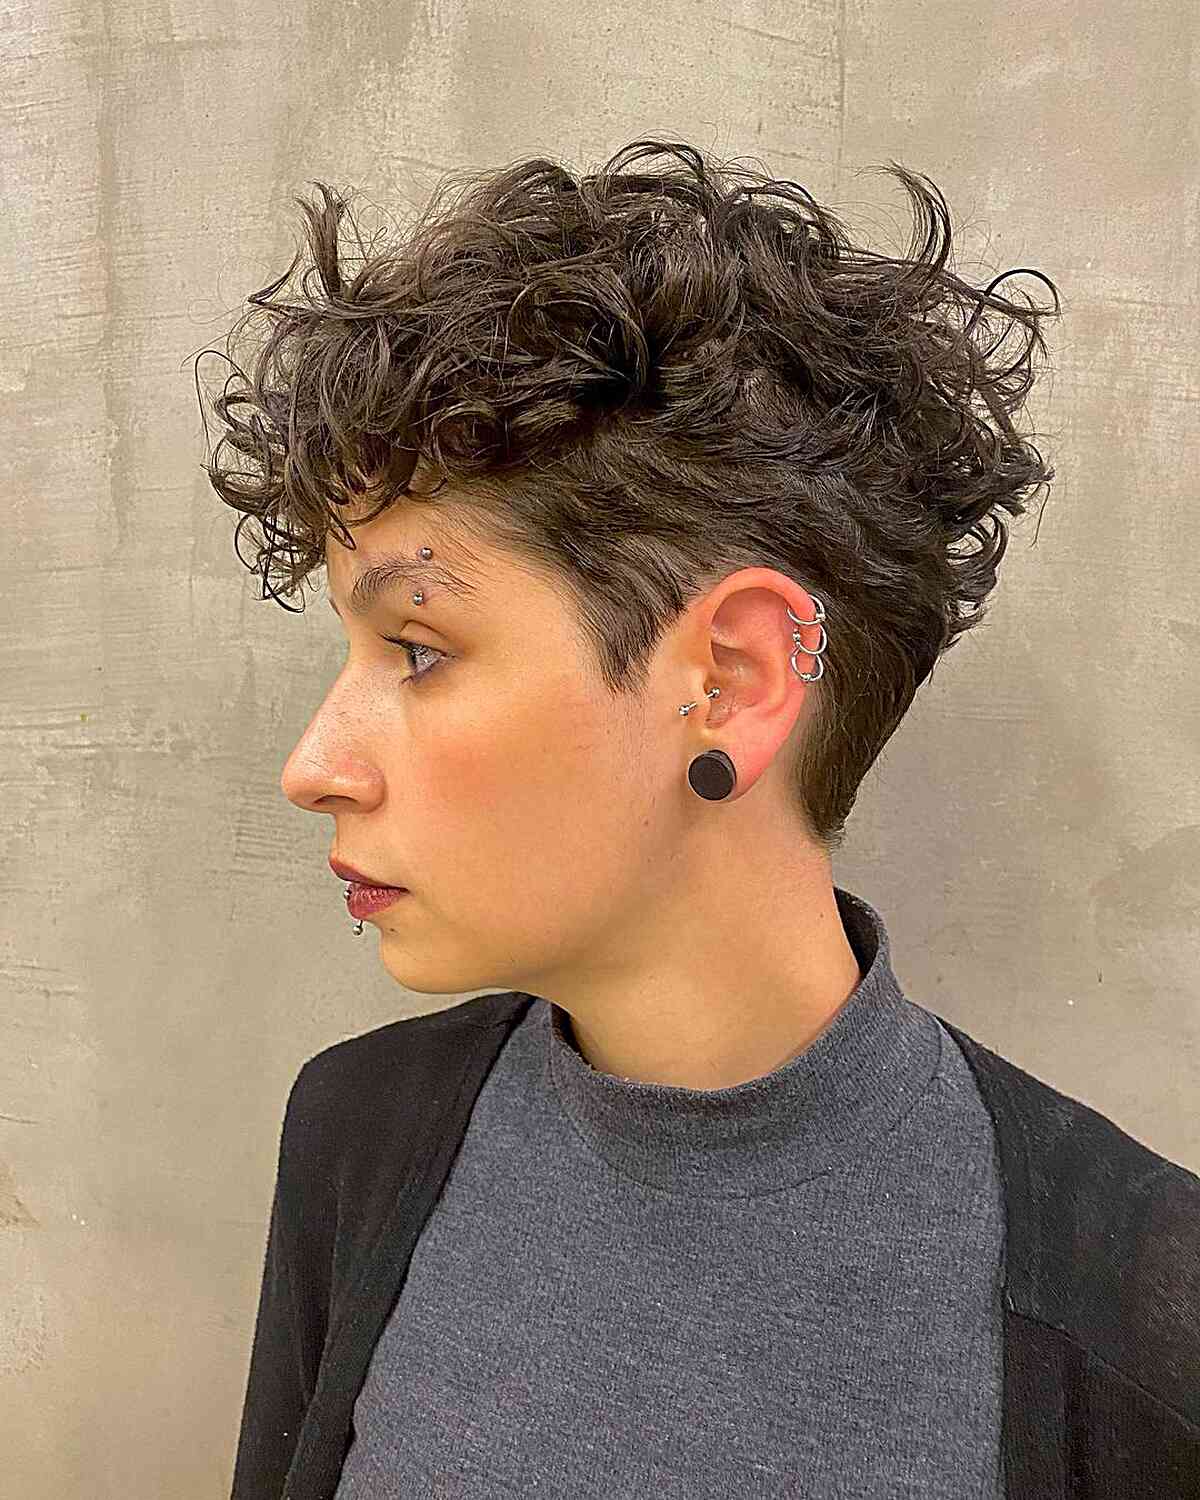 Short Curly and Thin Hair